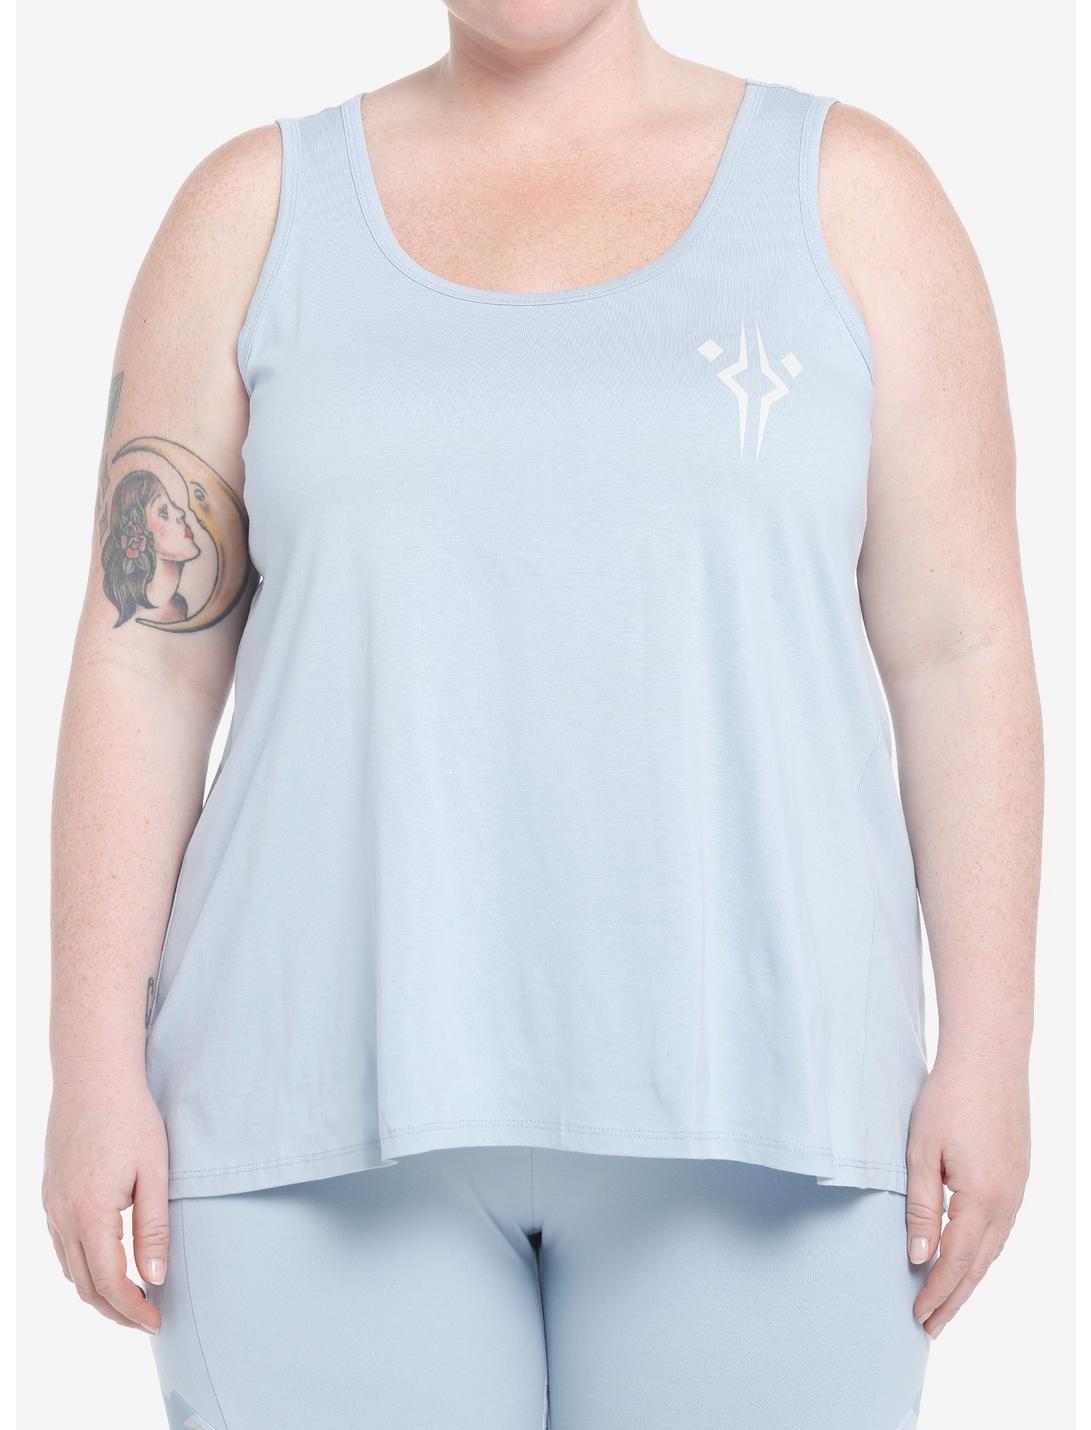 Her Universe Star Wars Ahsoka Tano Tank Top Plus Size Her Universe Exclusive, ICE BLUE, hi-res